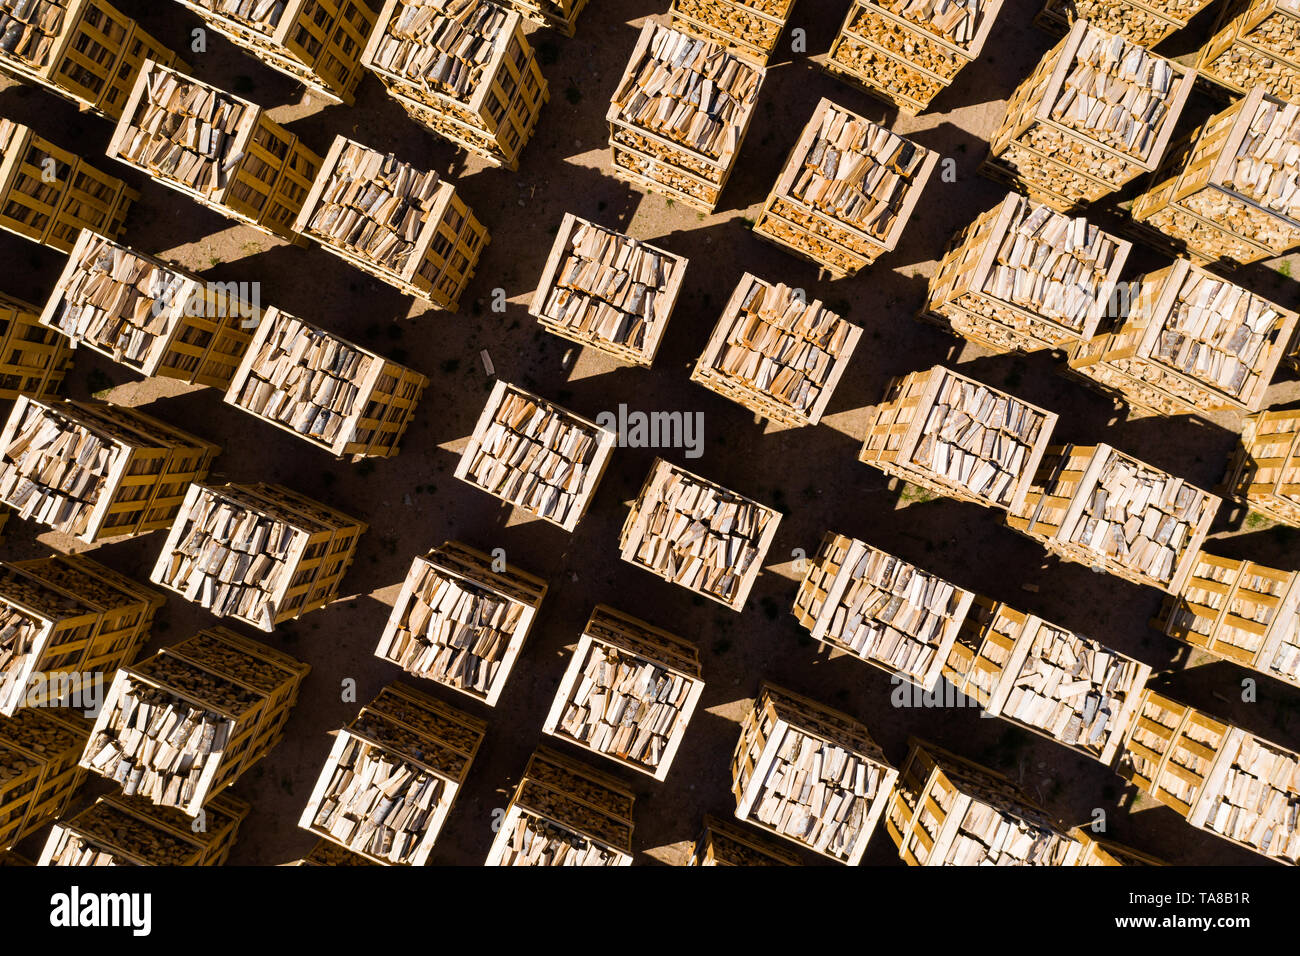 Rows of firewood stacked on pallets seen from straight above. Stock Photo